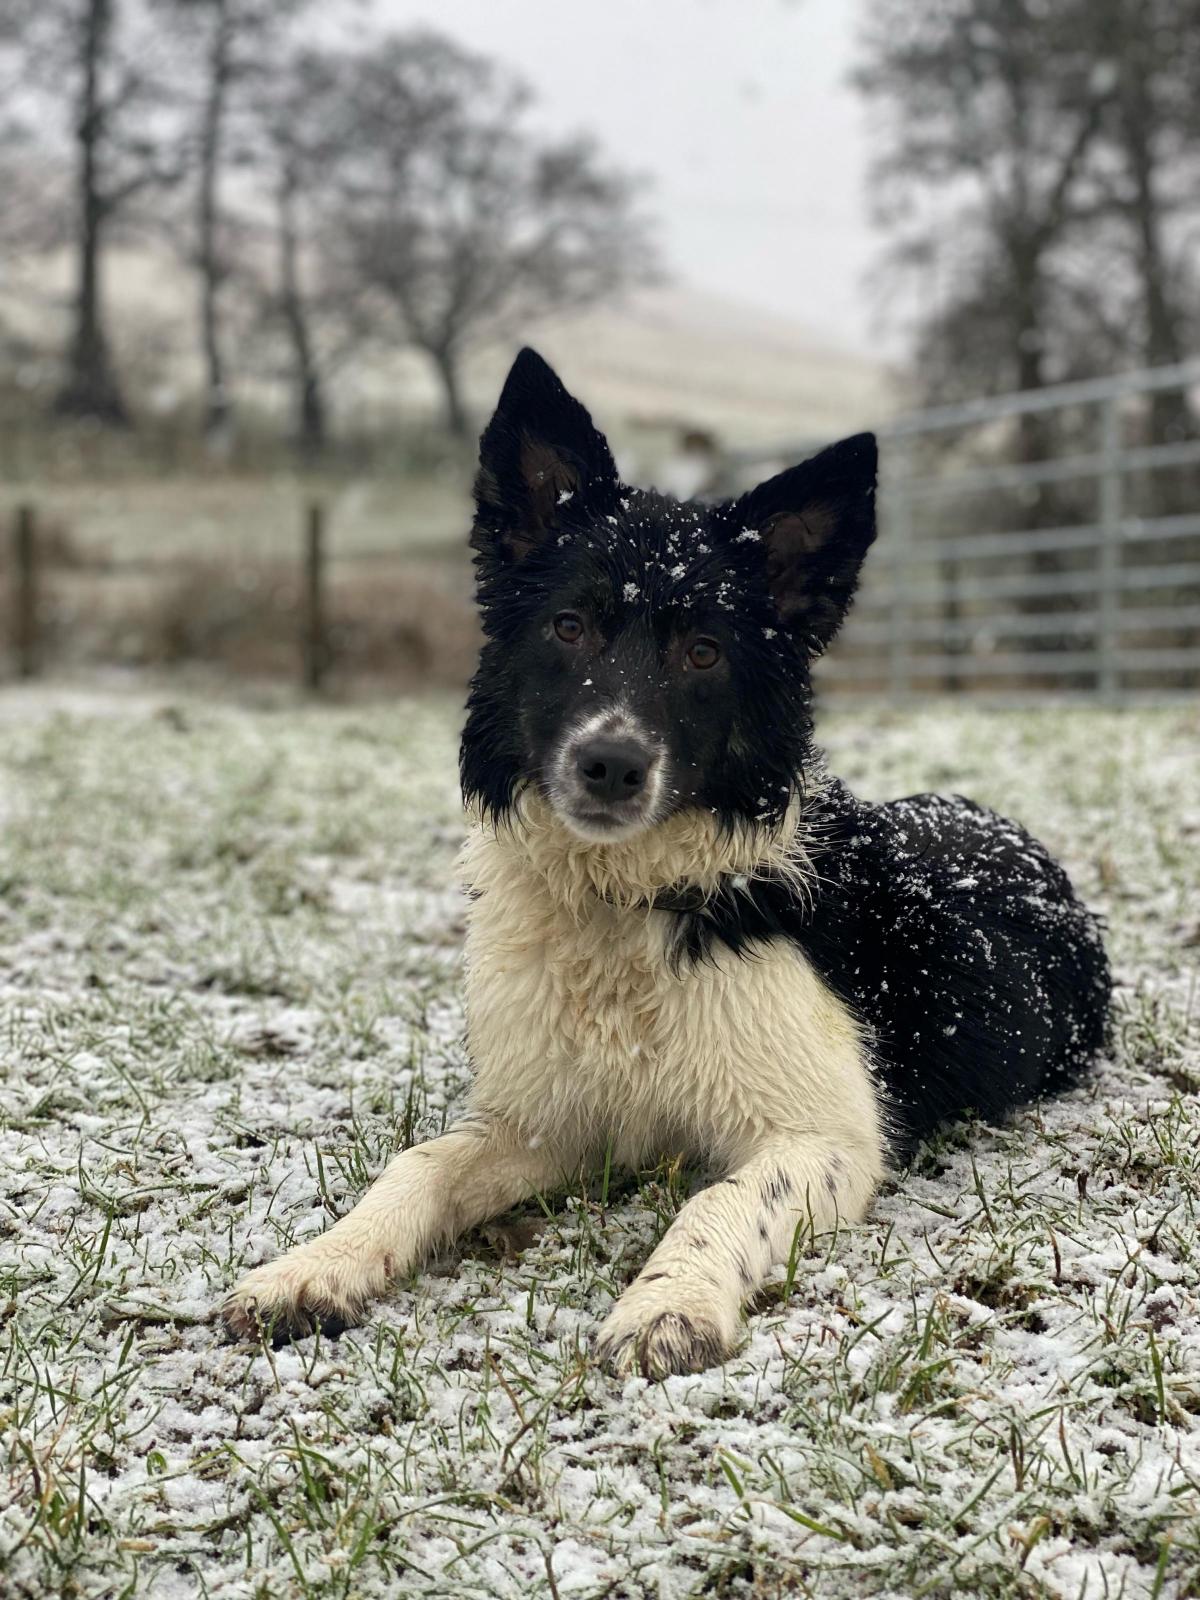 Tyler McKinlay - 6 month old, Braeface Demi enjoying her time in the snow. After sneaking into the field and having her own training session with the sheep.